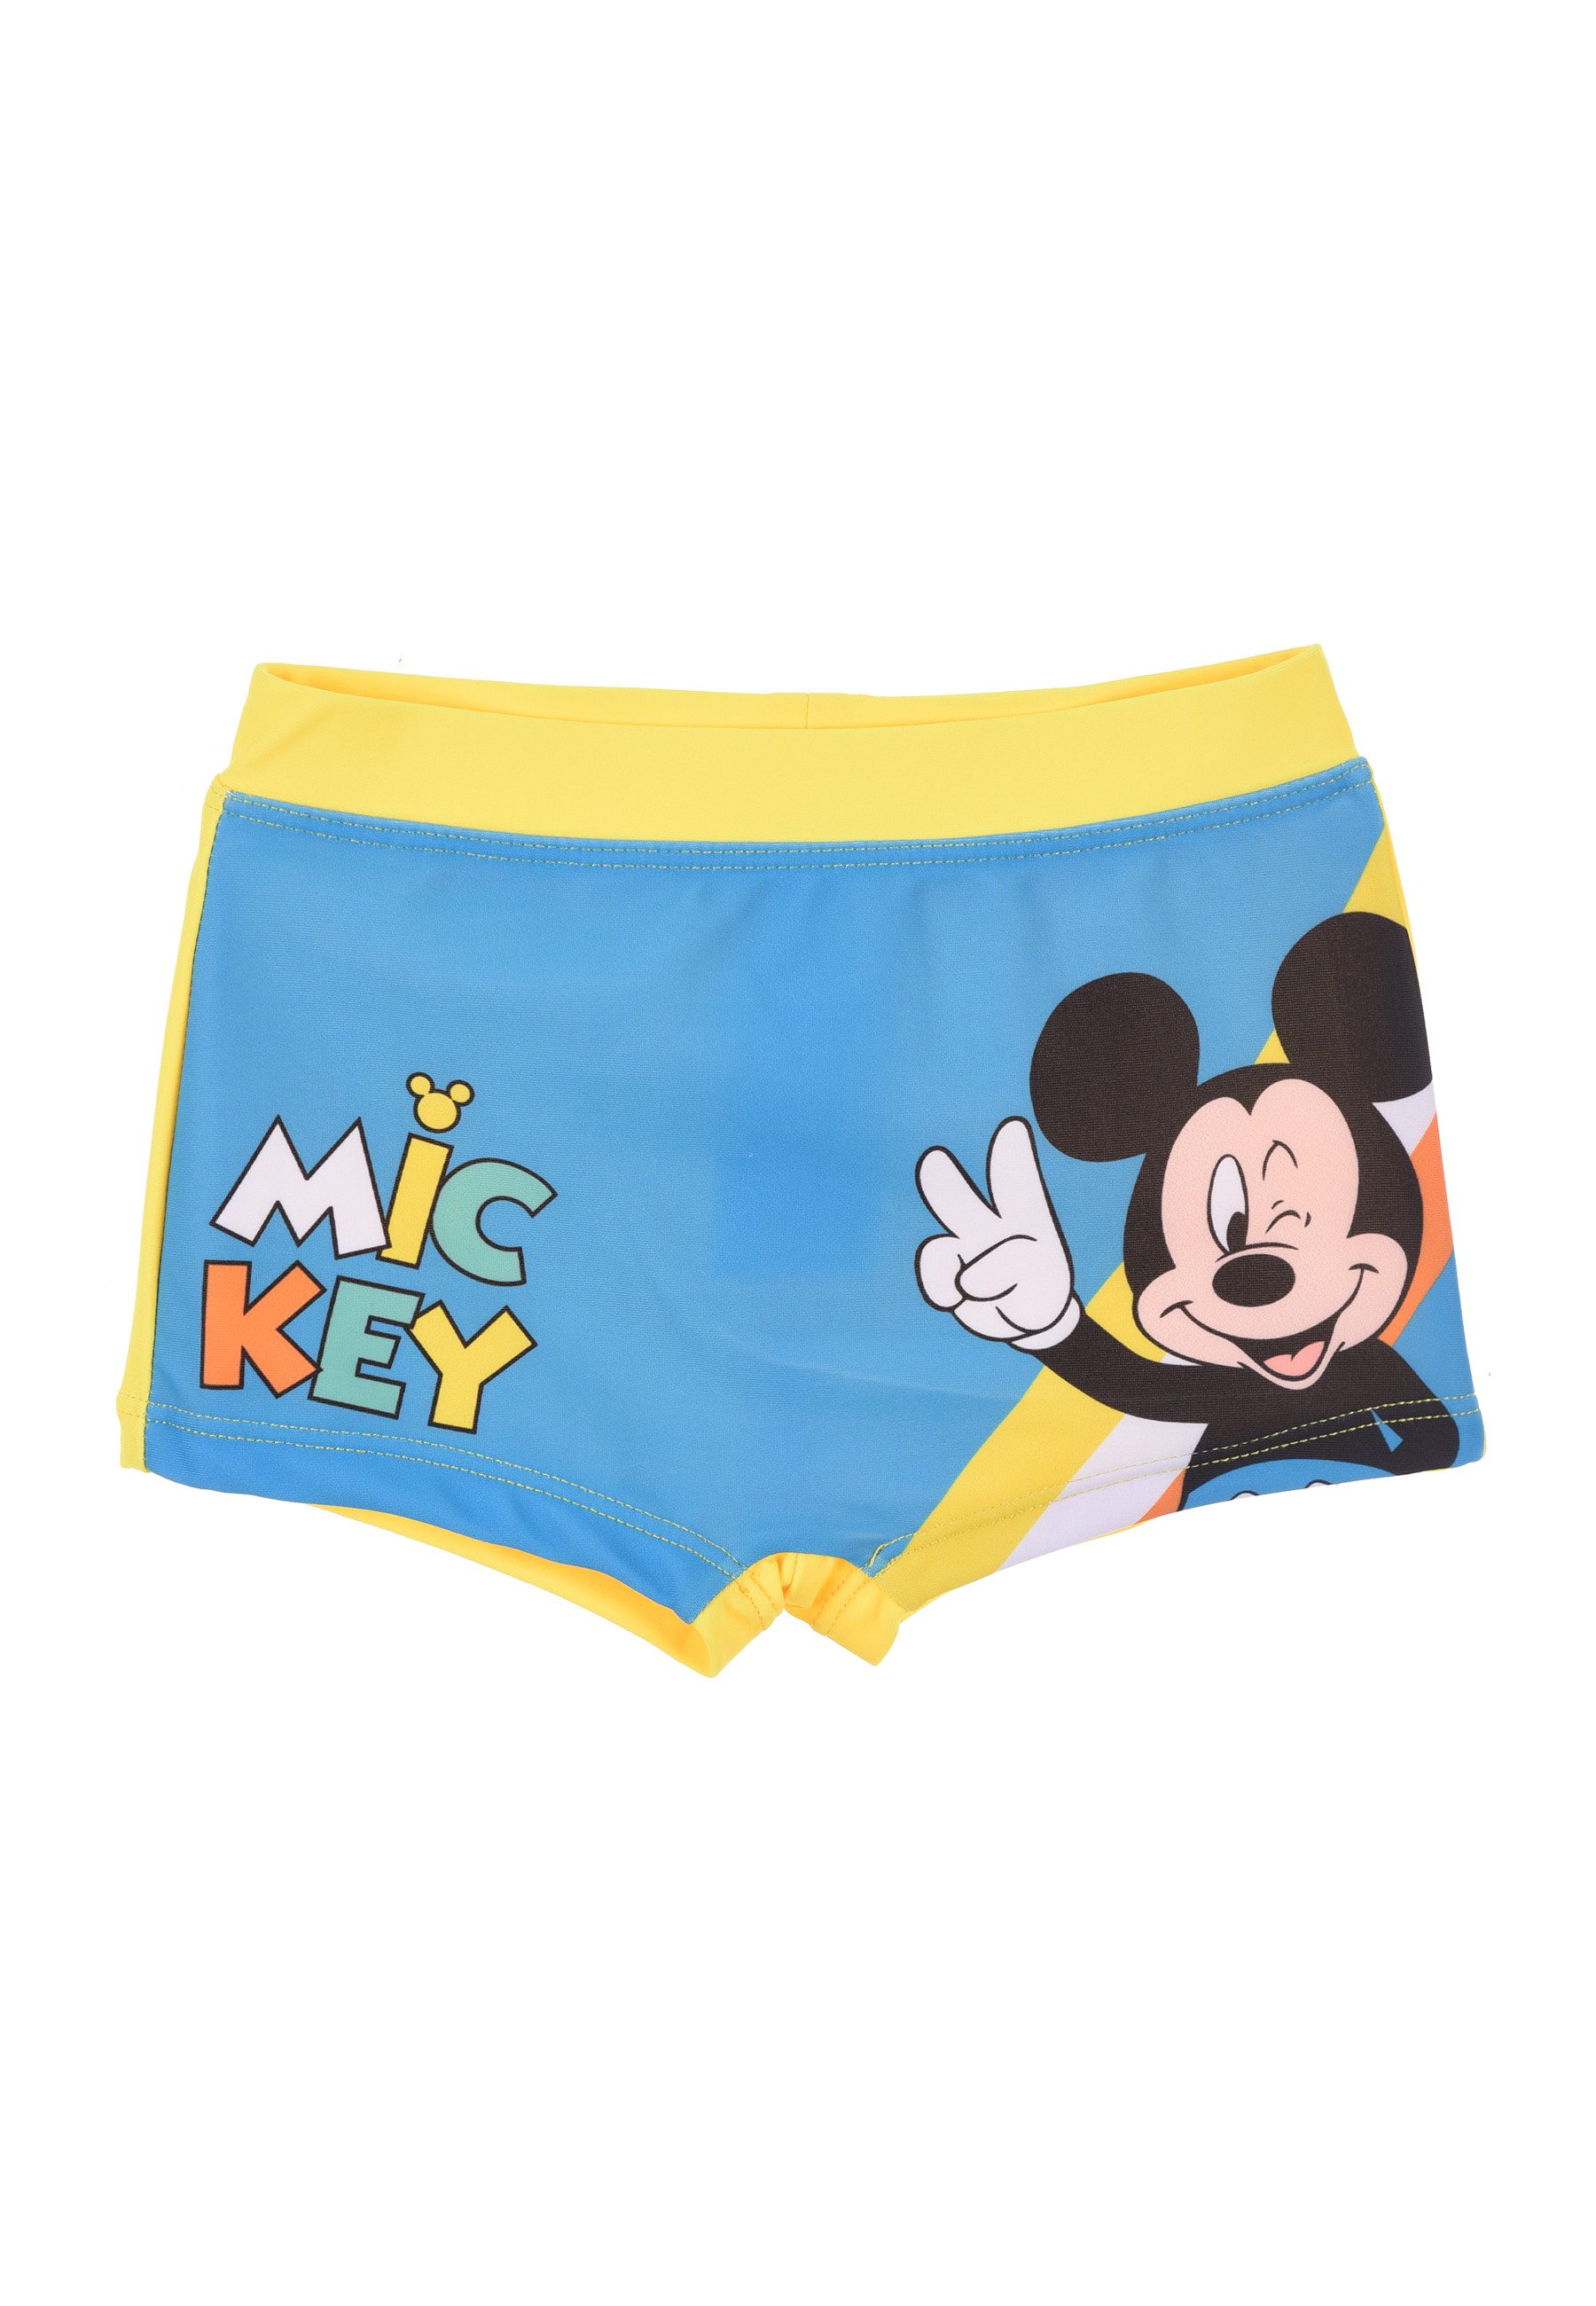 Disney Mickey Mouse Badehose Badehose Jungen